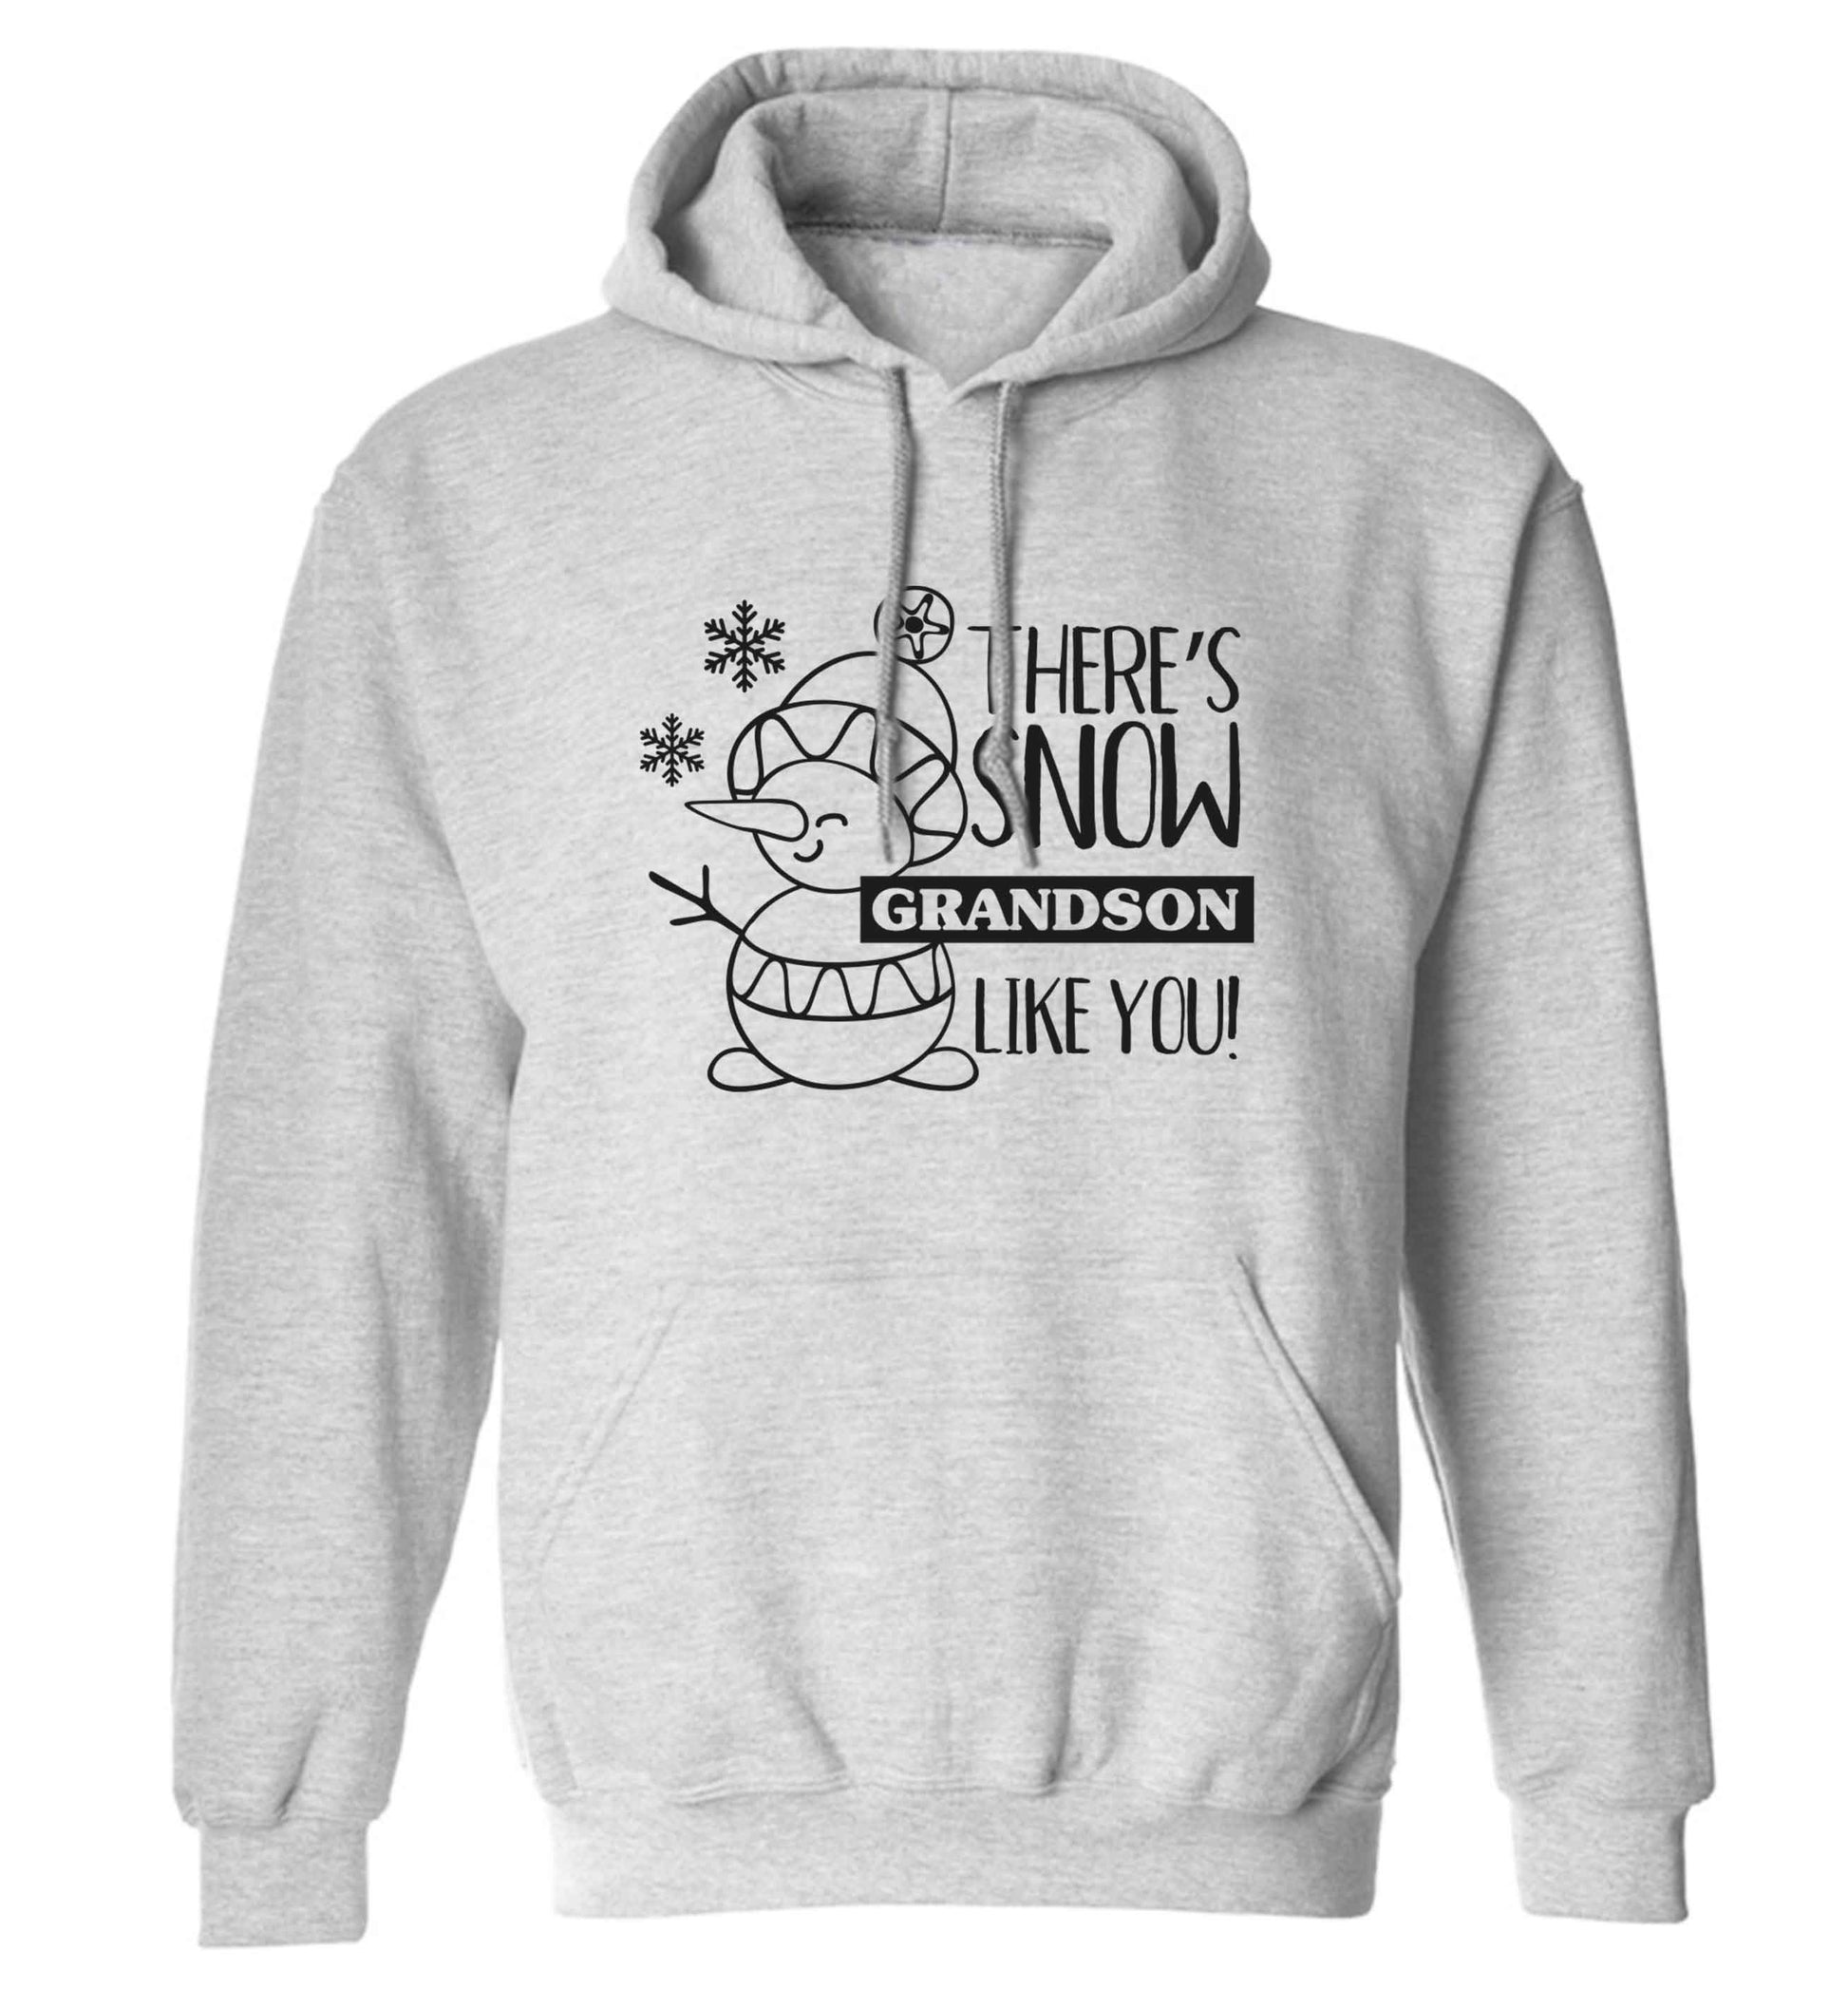 There's snow grandson like you adults unisex grey hoodie 2XL